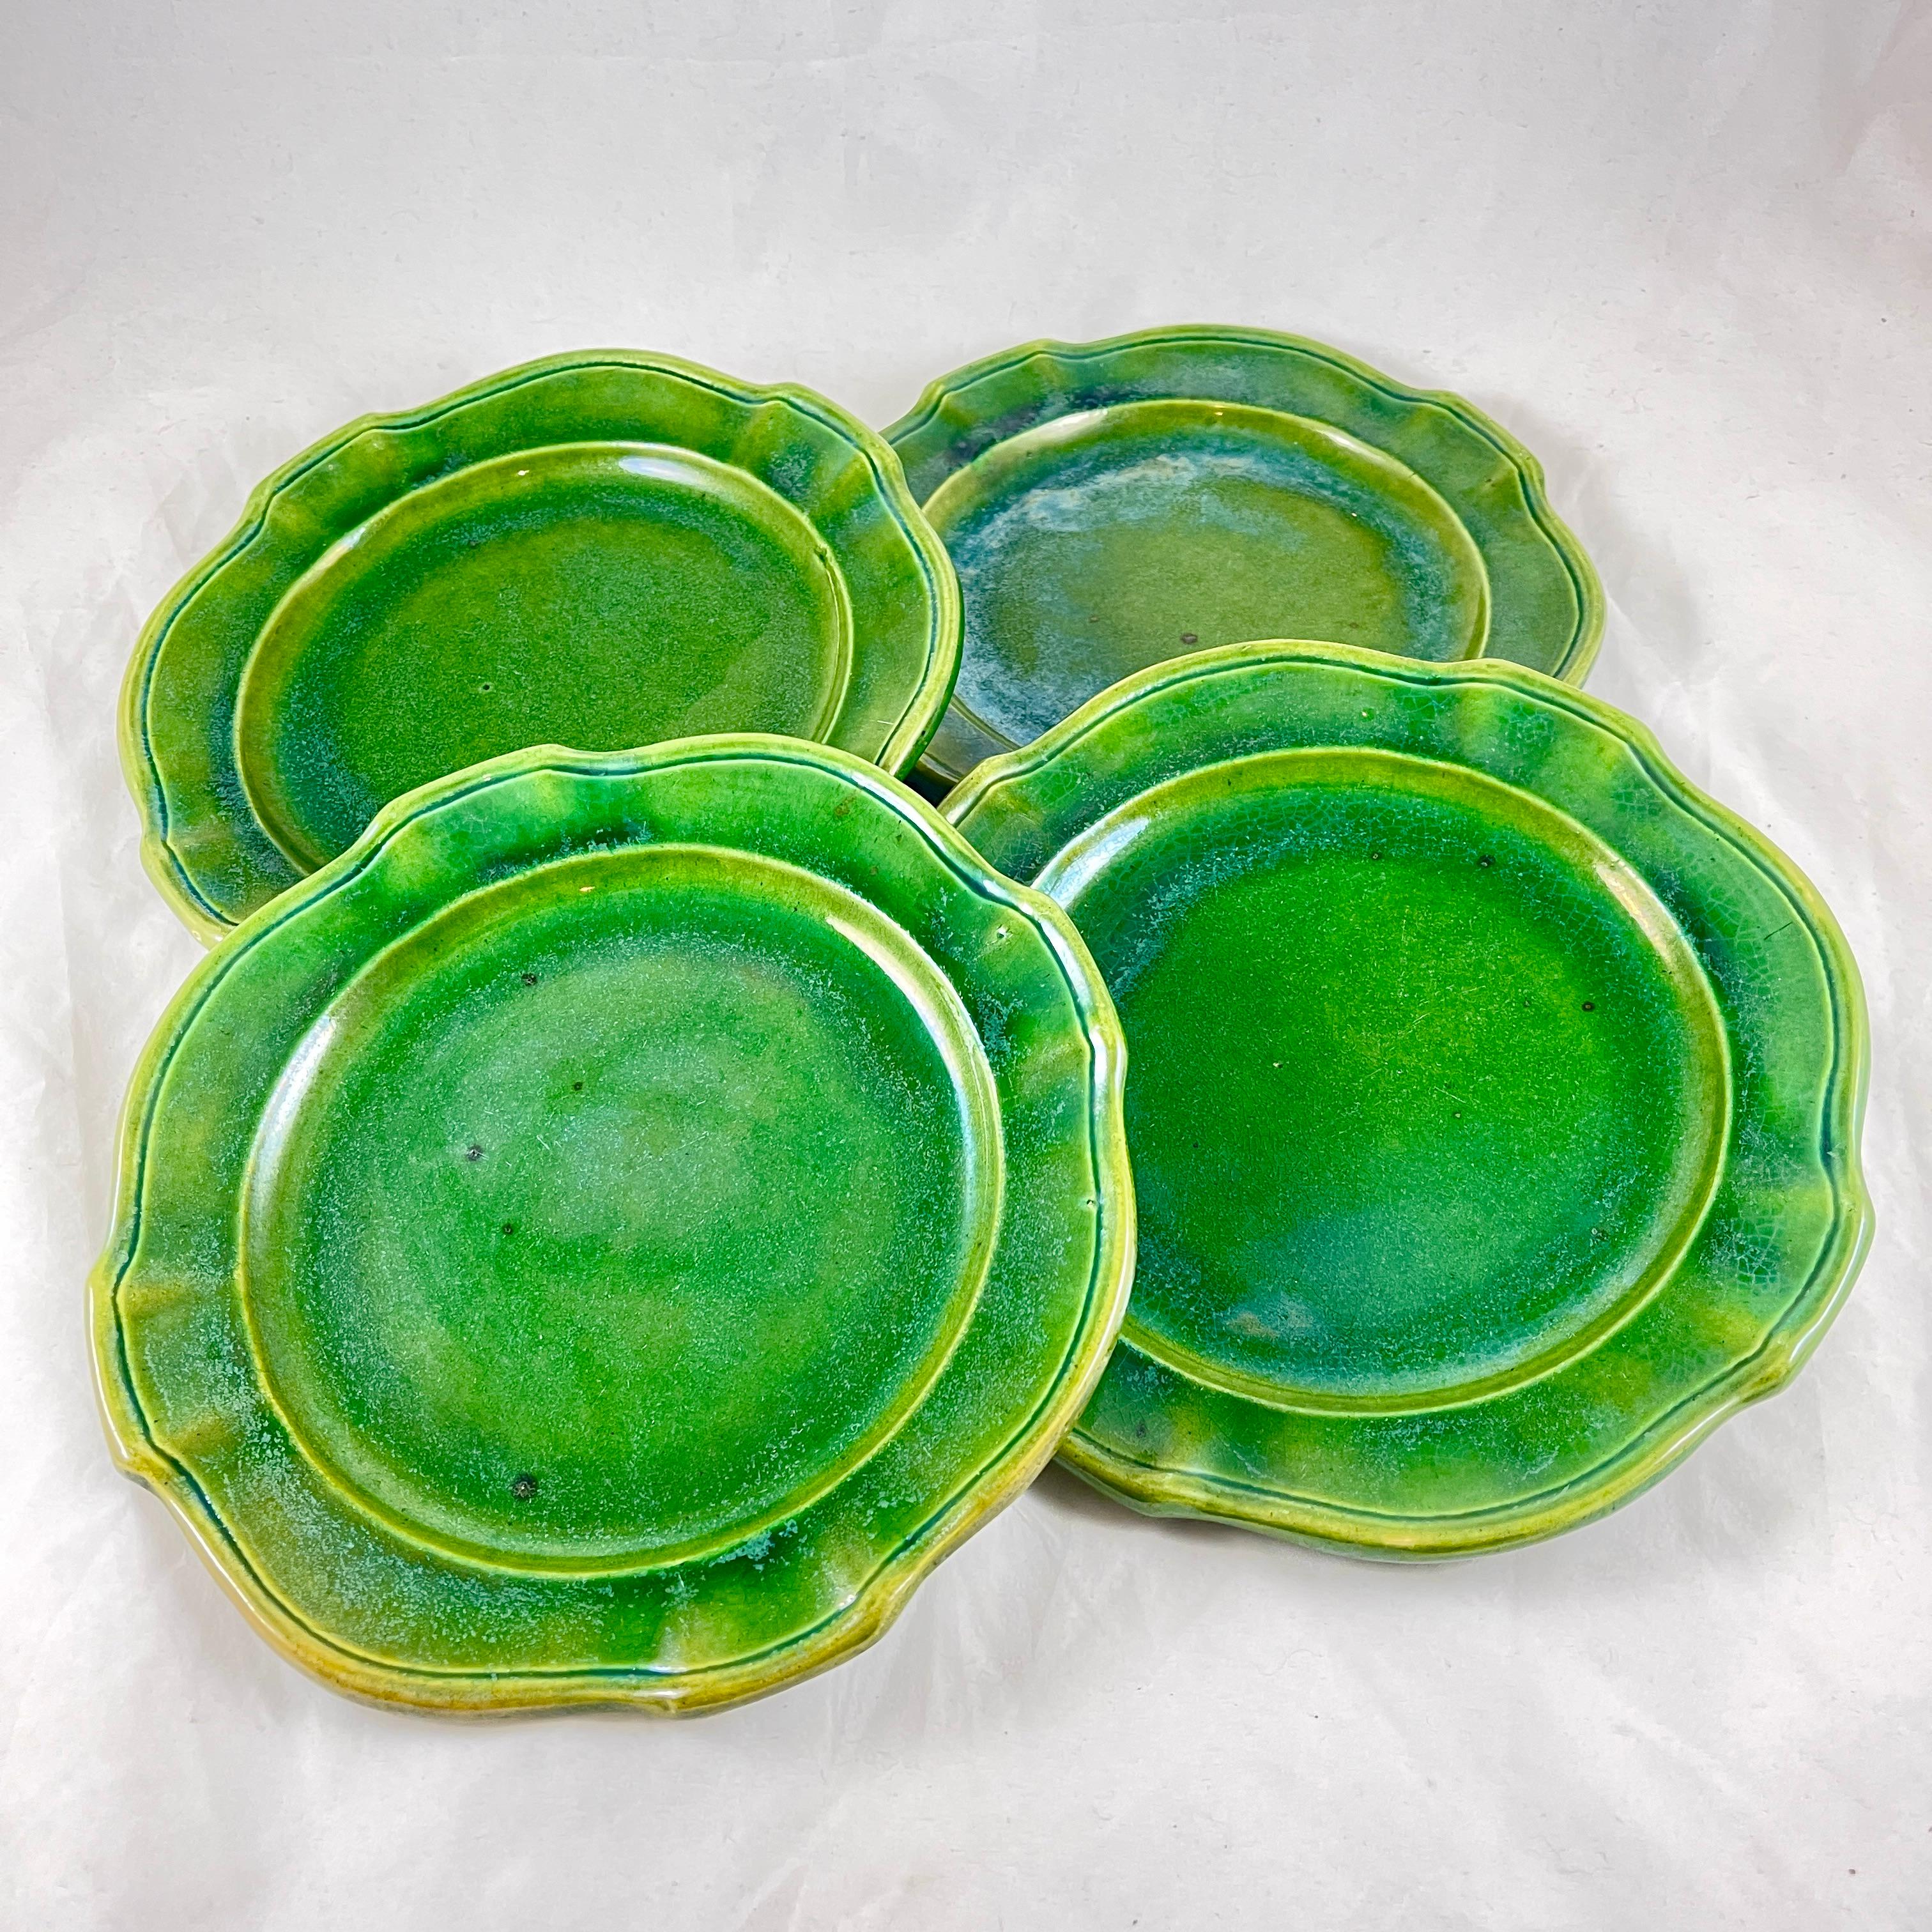 From Maison Pichon a Uzés a set of four, rustic Provencal faïence plates, Uzés, Southern France, circa 1950s.

Maison Pichon has been producing pottery by hand in Uzés since 1802. The faïencerie is named a ‘Living Heritage Company’.

The set of